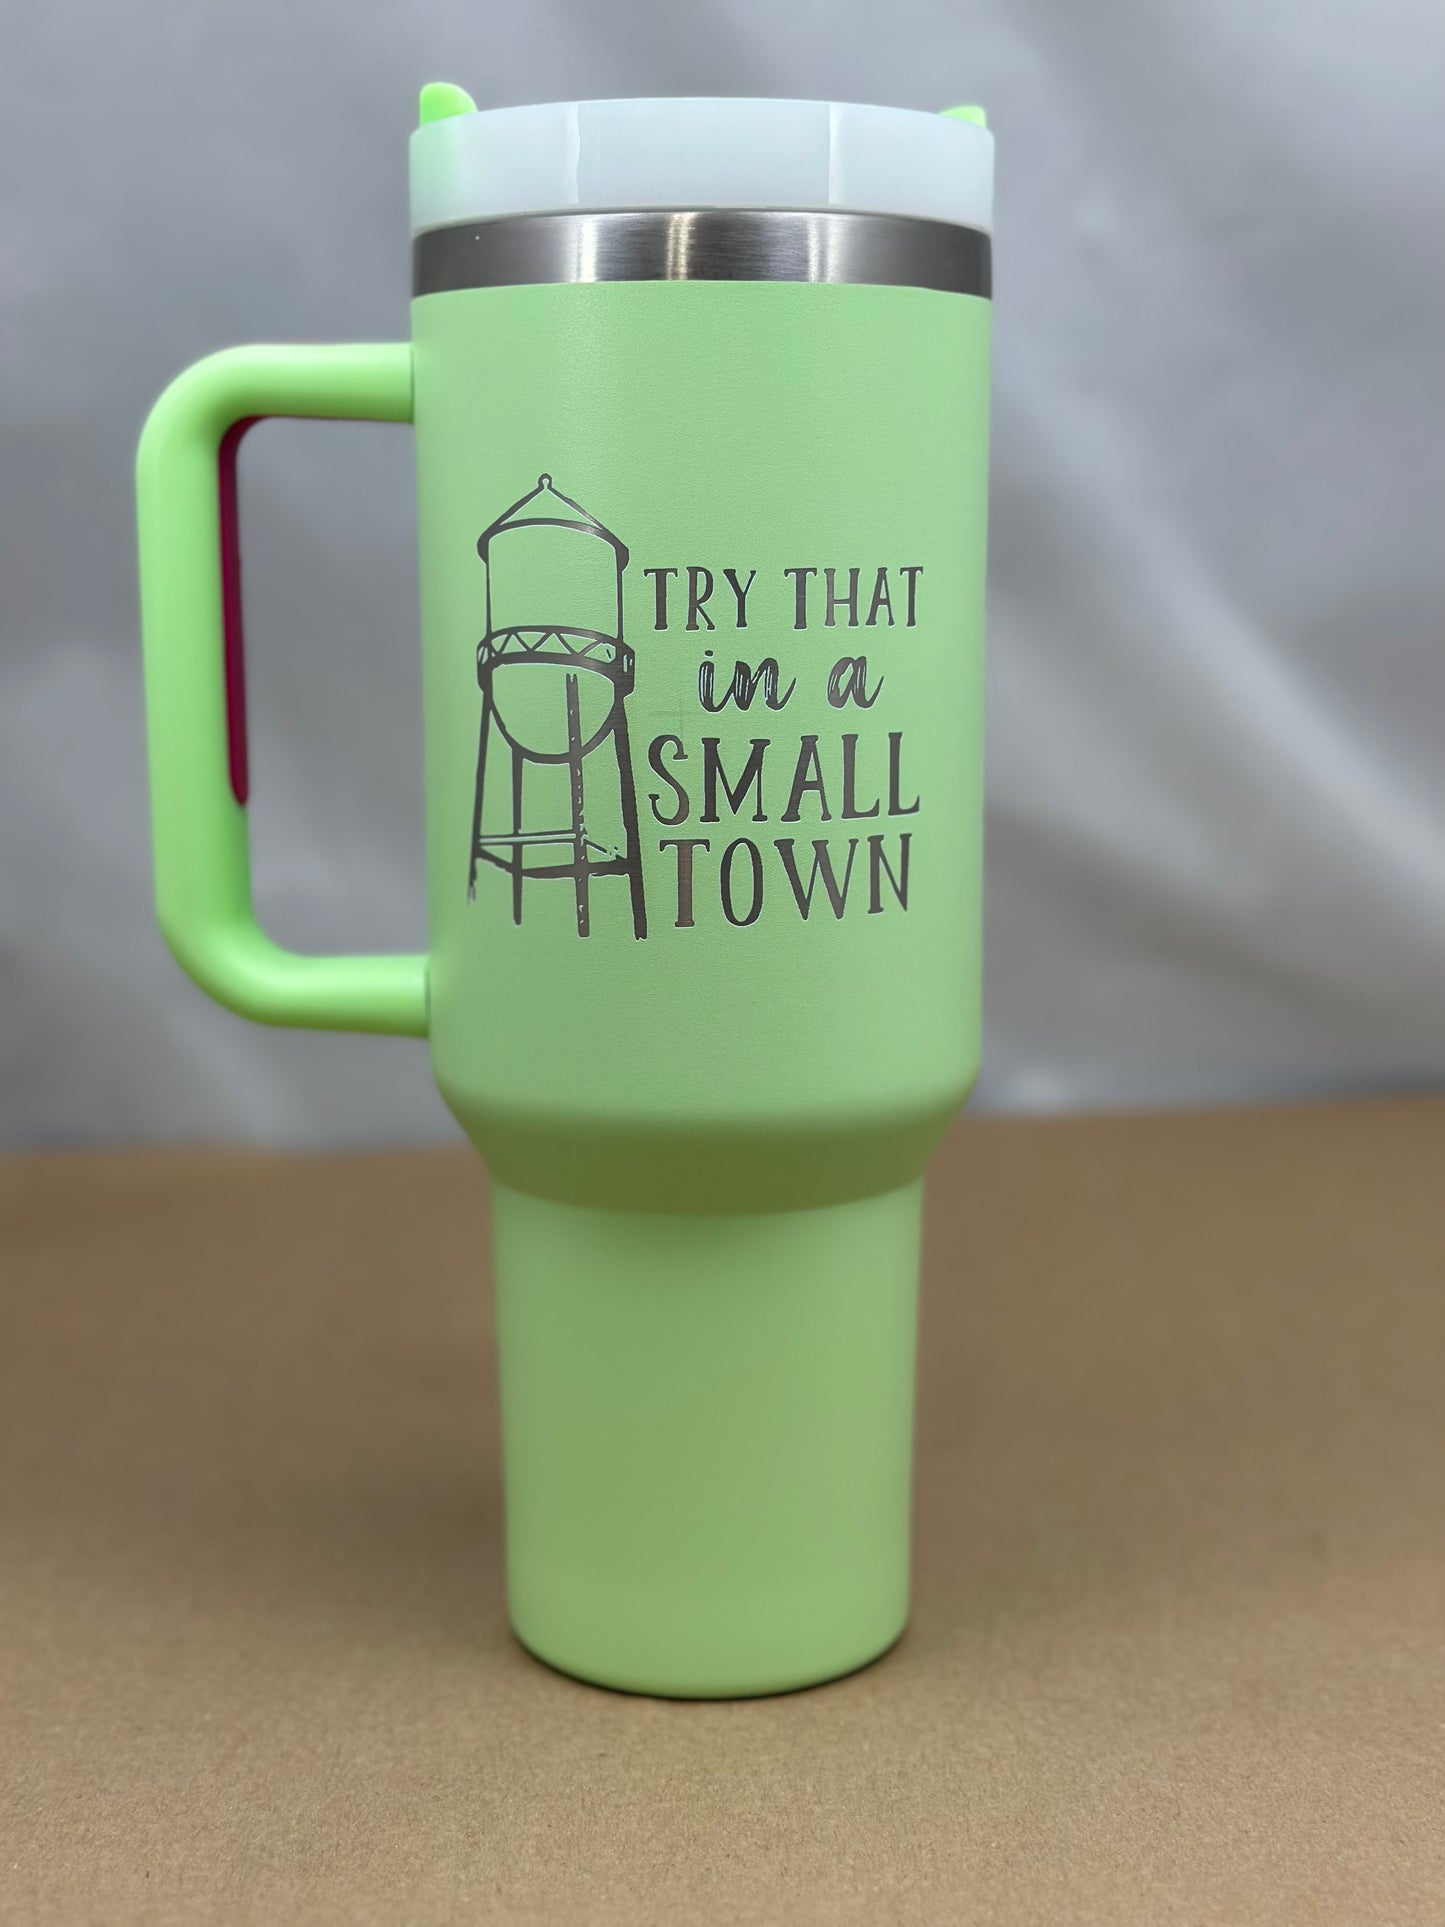 Mug handle comparison for those still unsure about the new Travel